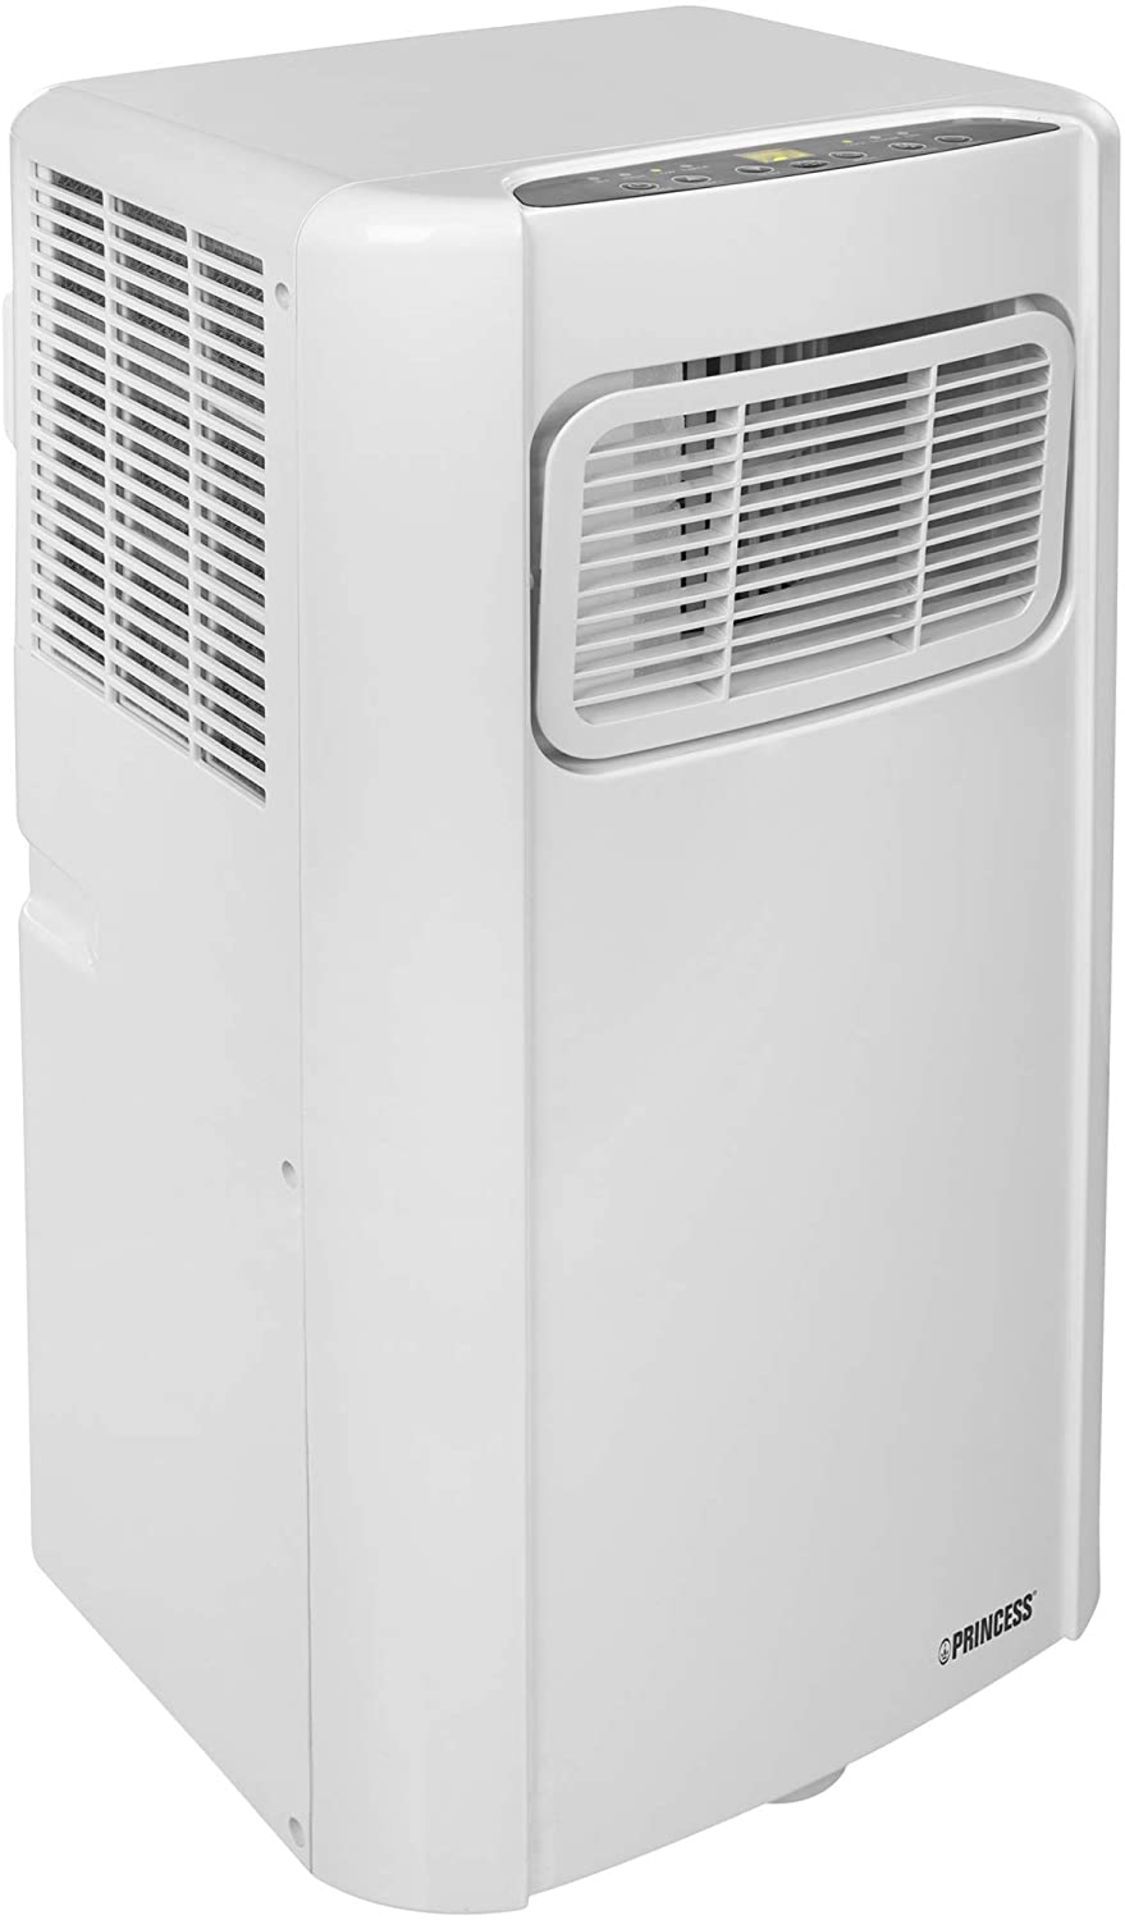 PRINCESS MOBILE AIR CONDITIONER 7000BTU, 785W, A ENERGY RATED RRP £299.99